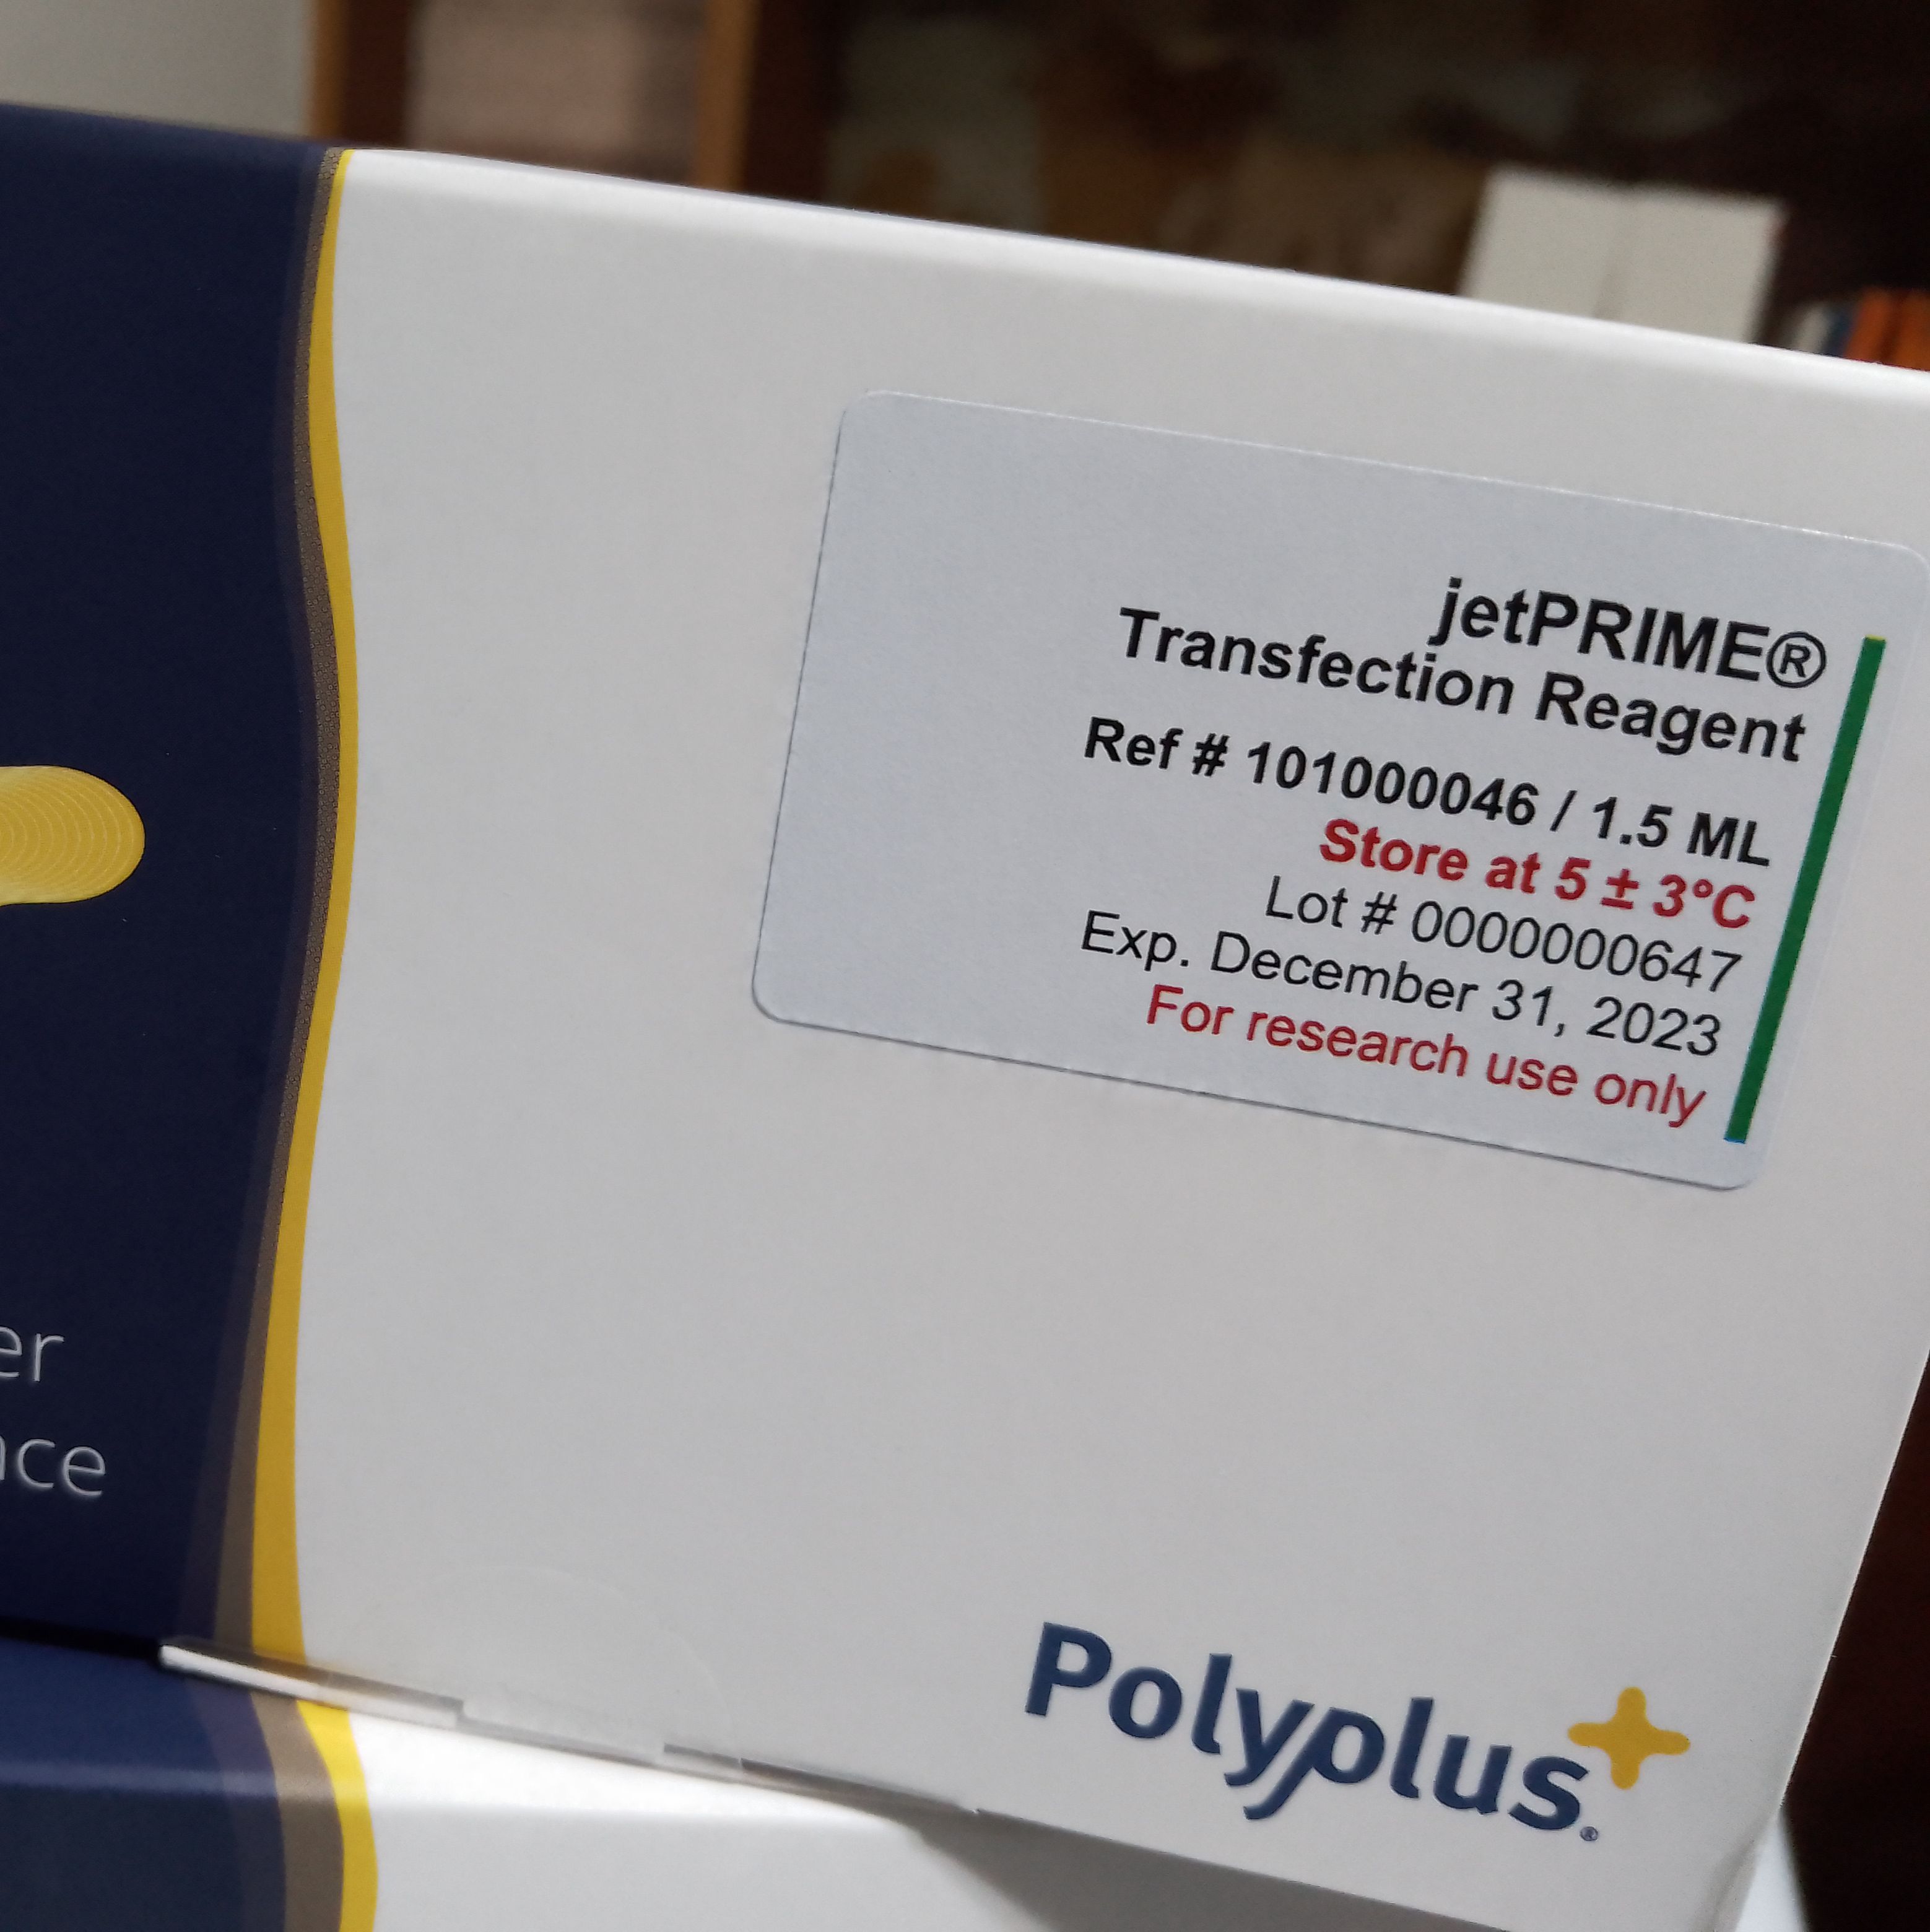 Polyplus  1.5 mL of transfection reagent + 2 x 60 mL of jetPRIME® buffer